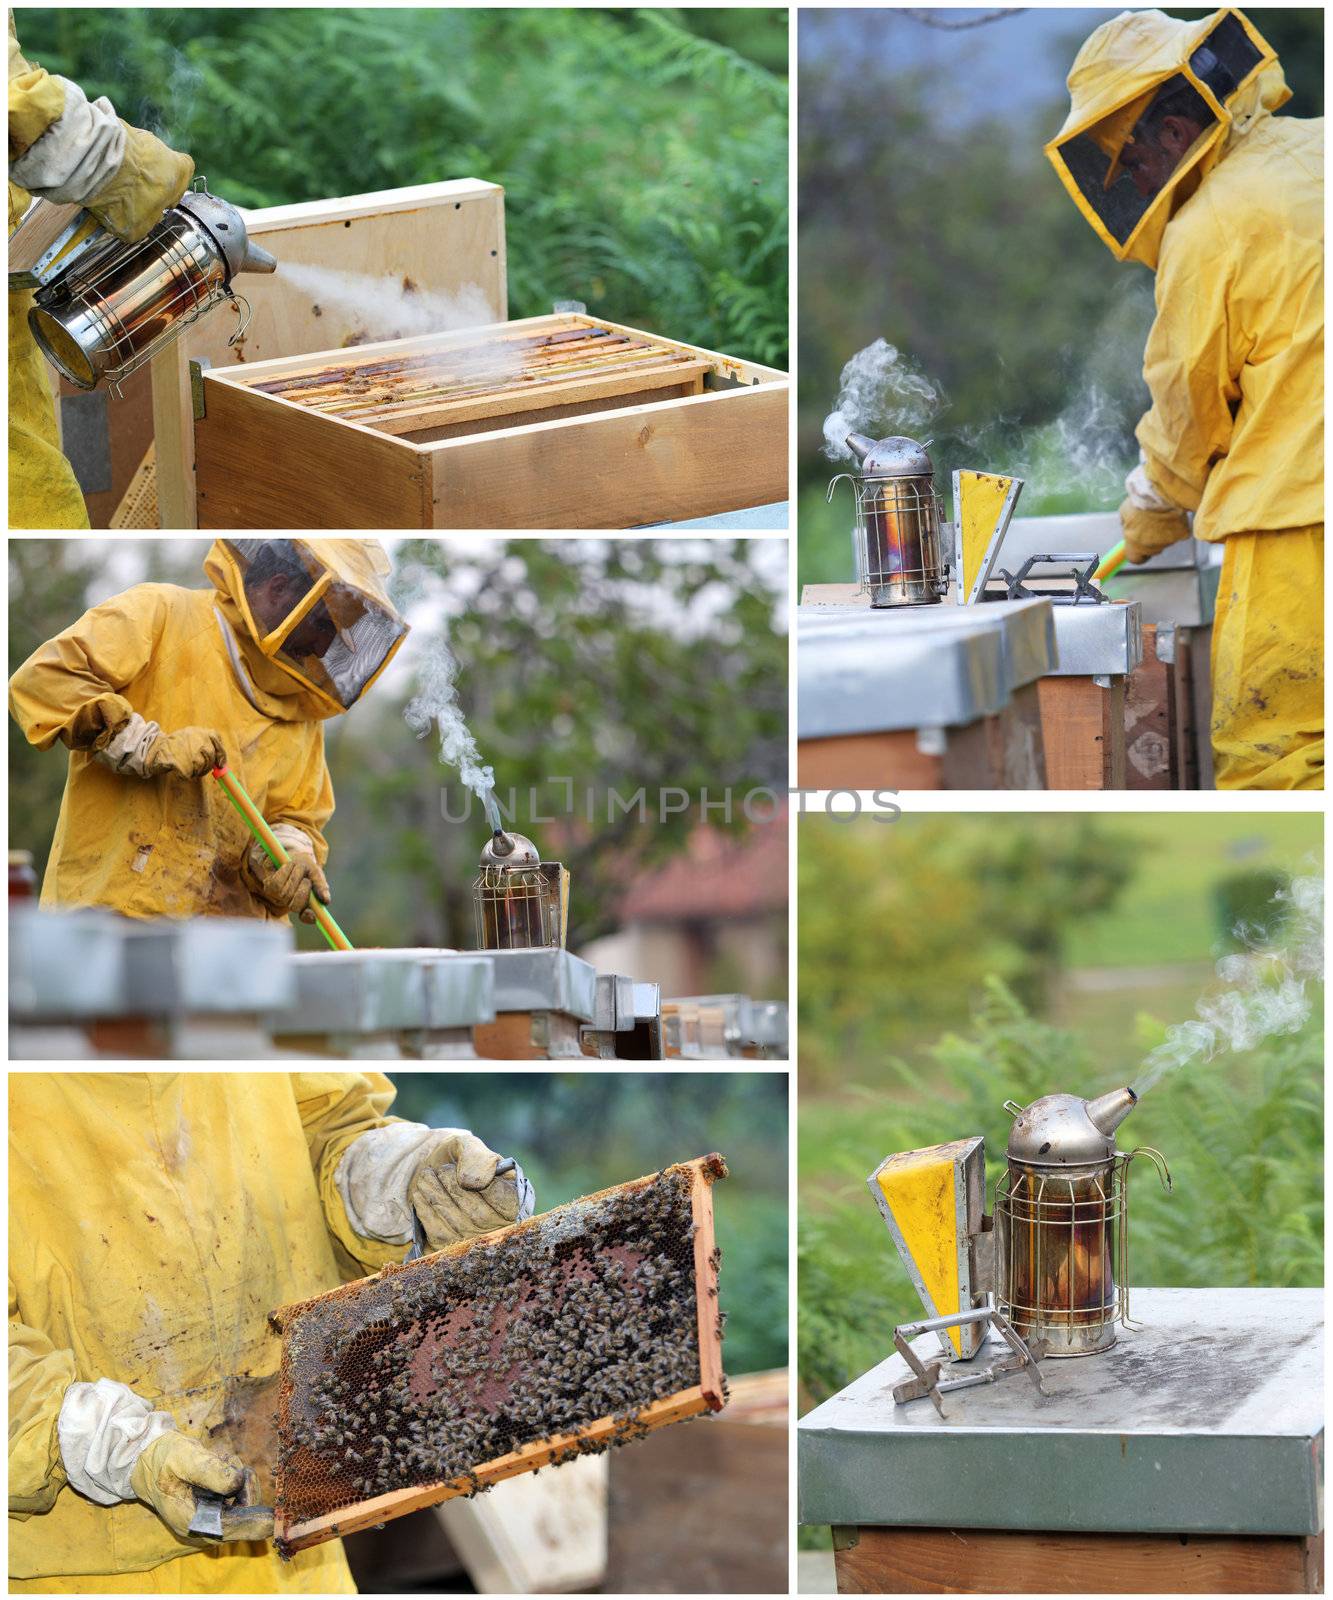 Beekeeper with hives , smoker, honeycomb . Apiculture collage